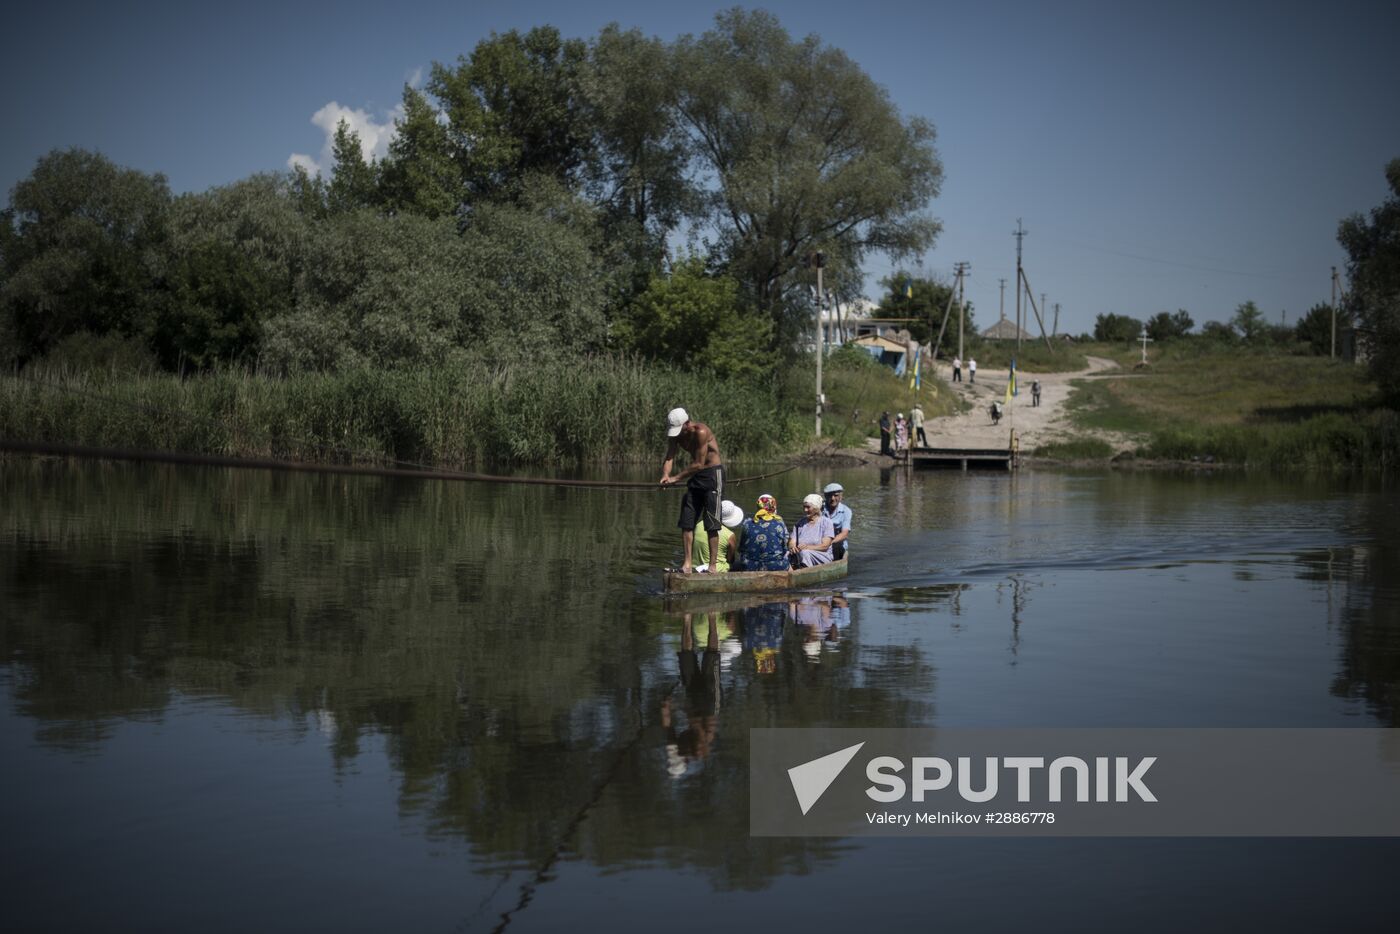 Crossing through the Seversky Donets river that separates Ukraine and the LNR